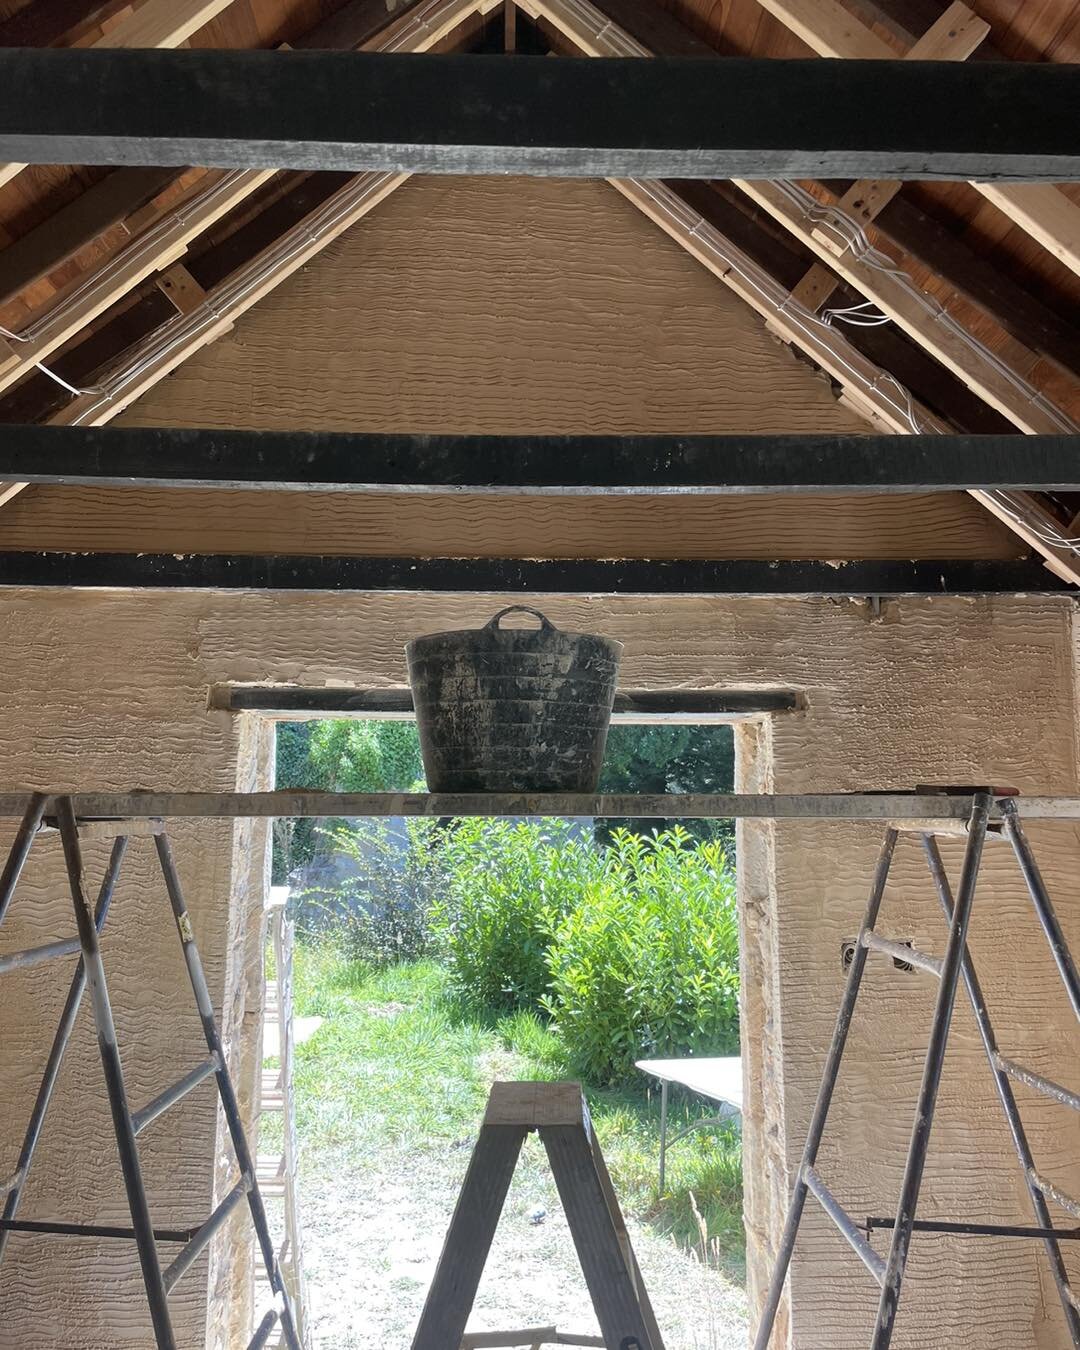 Left the 'folly' in Aldgate to settle down after many layers of Lime render covered some pretty deep stones. When we return we will plaster board the raked ceiling that we added timbers too, to adjust the angle of the &lsquo;rake&rsquo;. Once that st